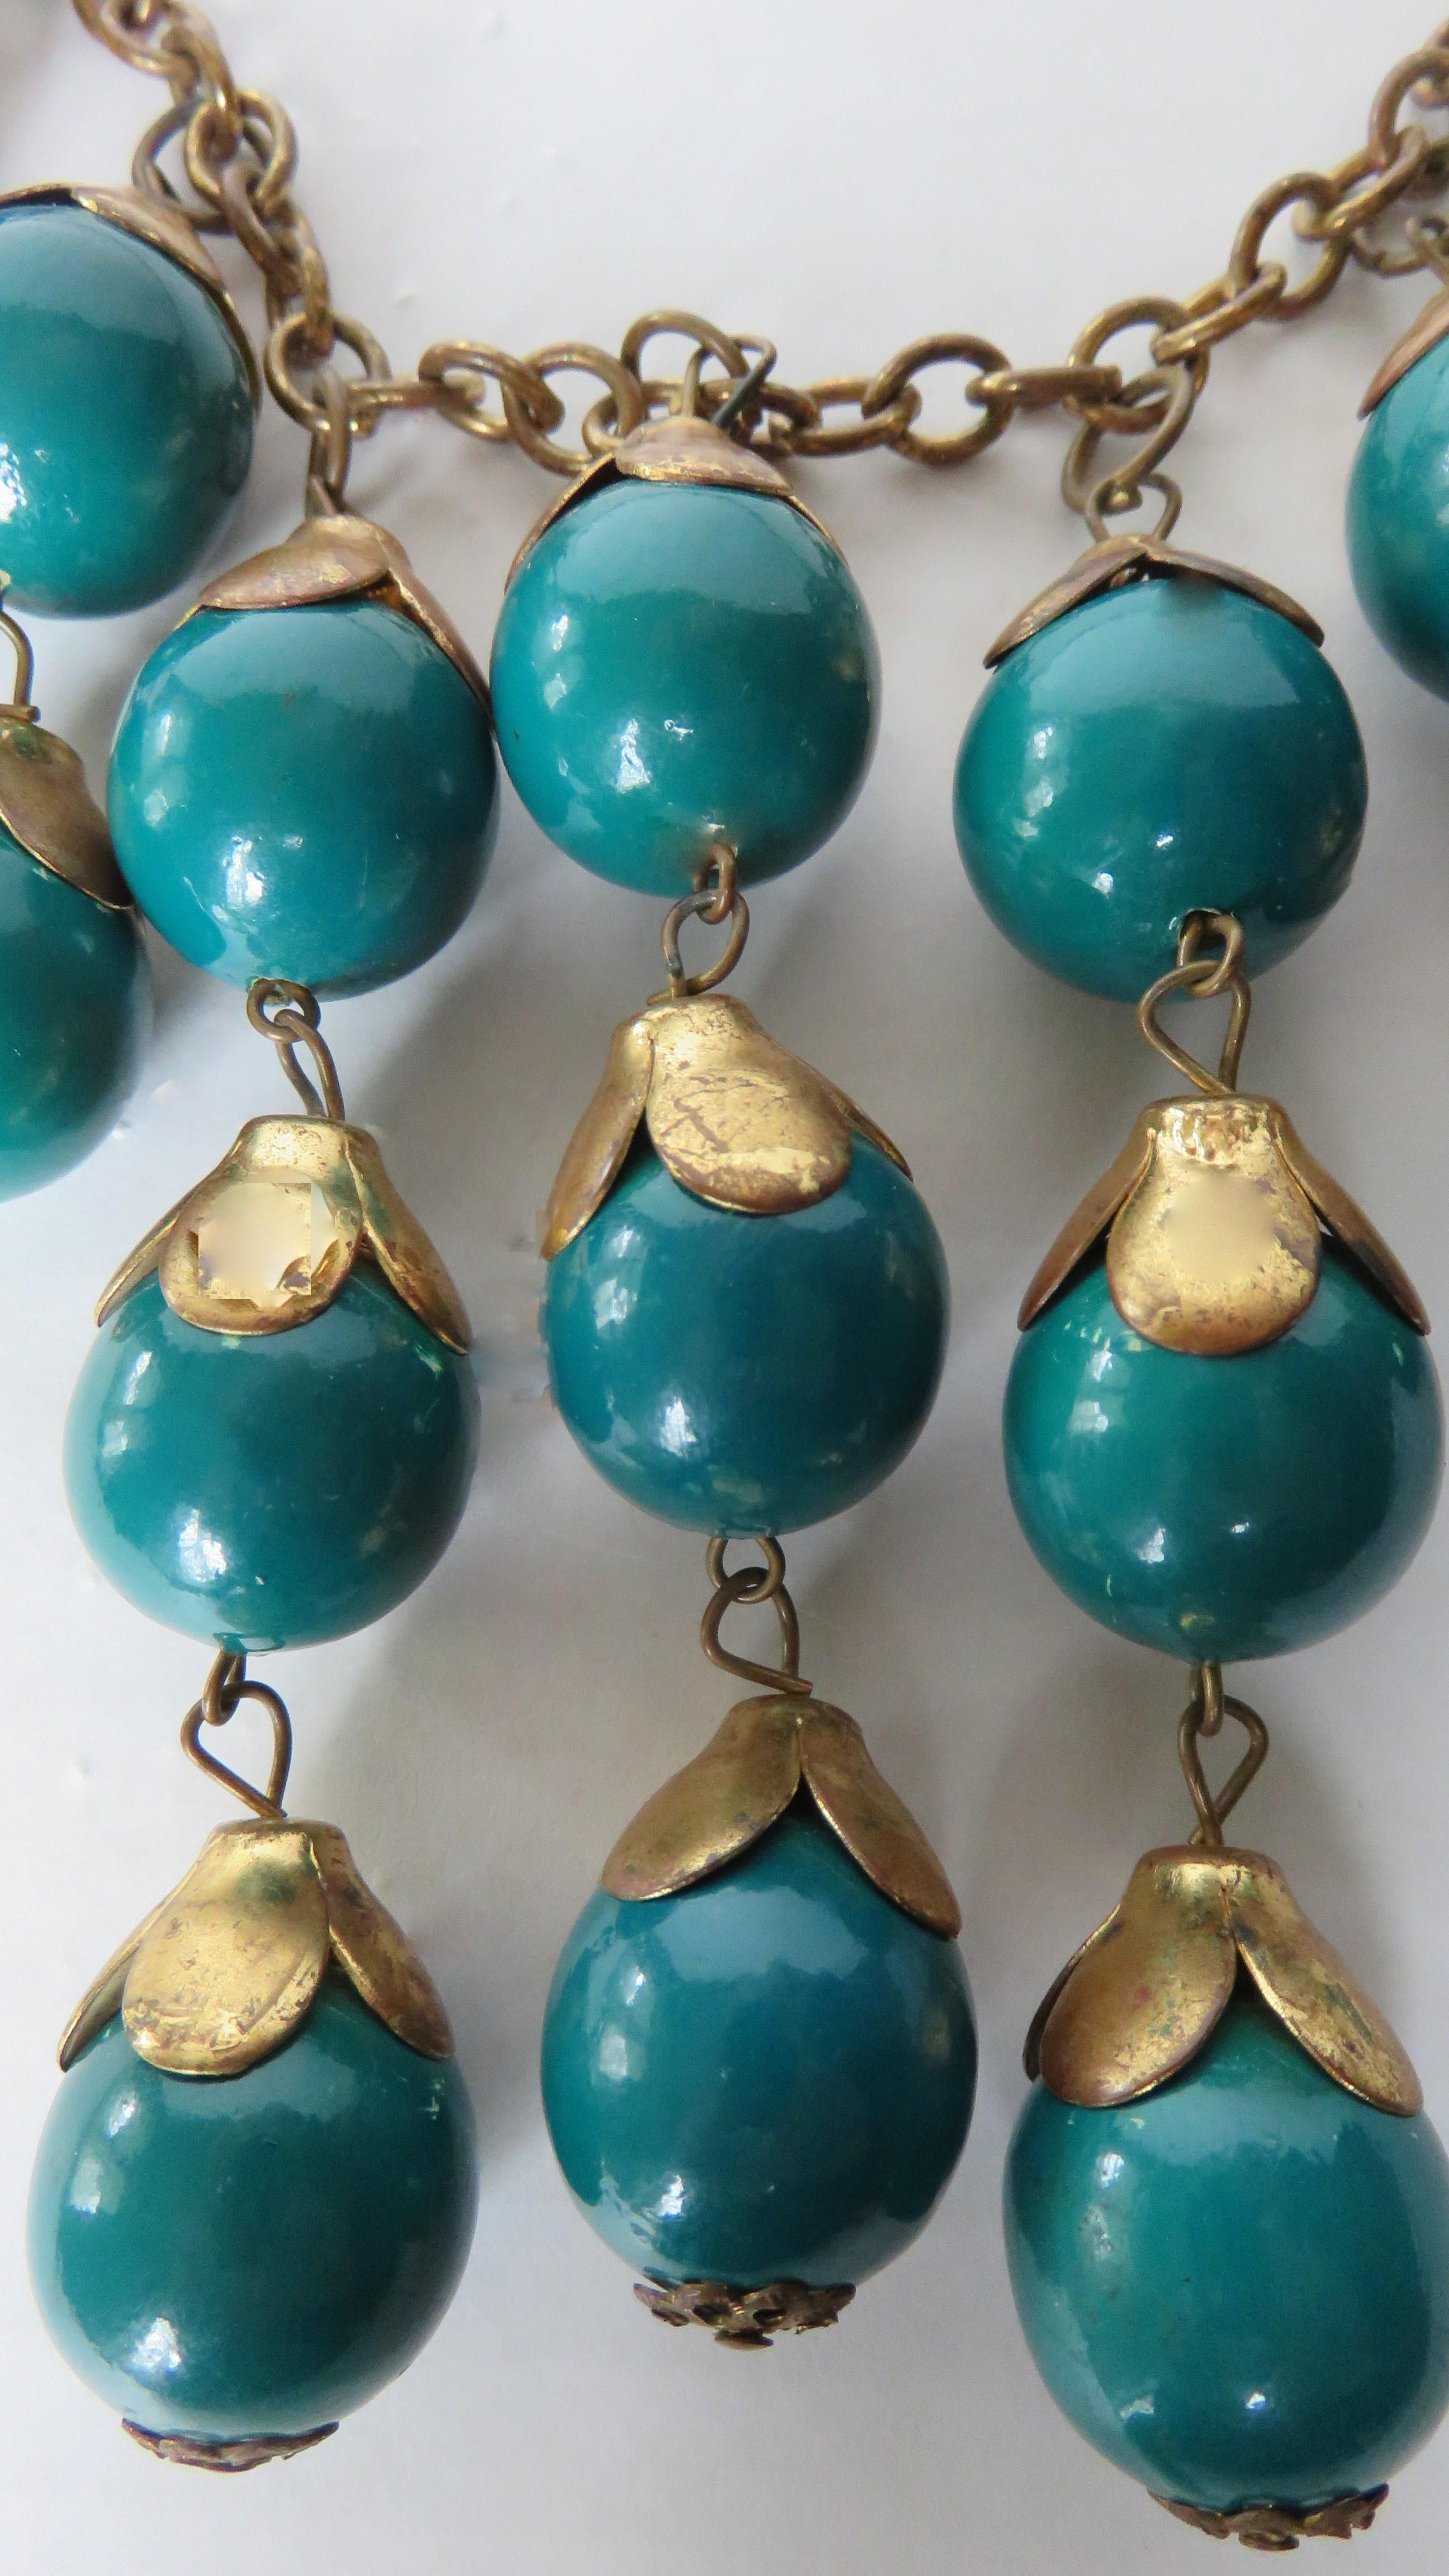 Brass and Celluloid Ball Drop 1940s Necklace For Sale 5